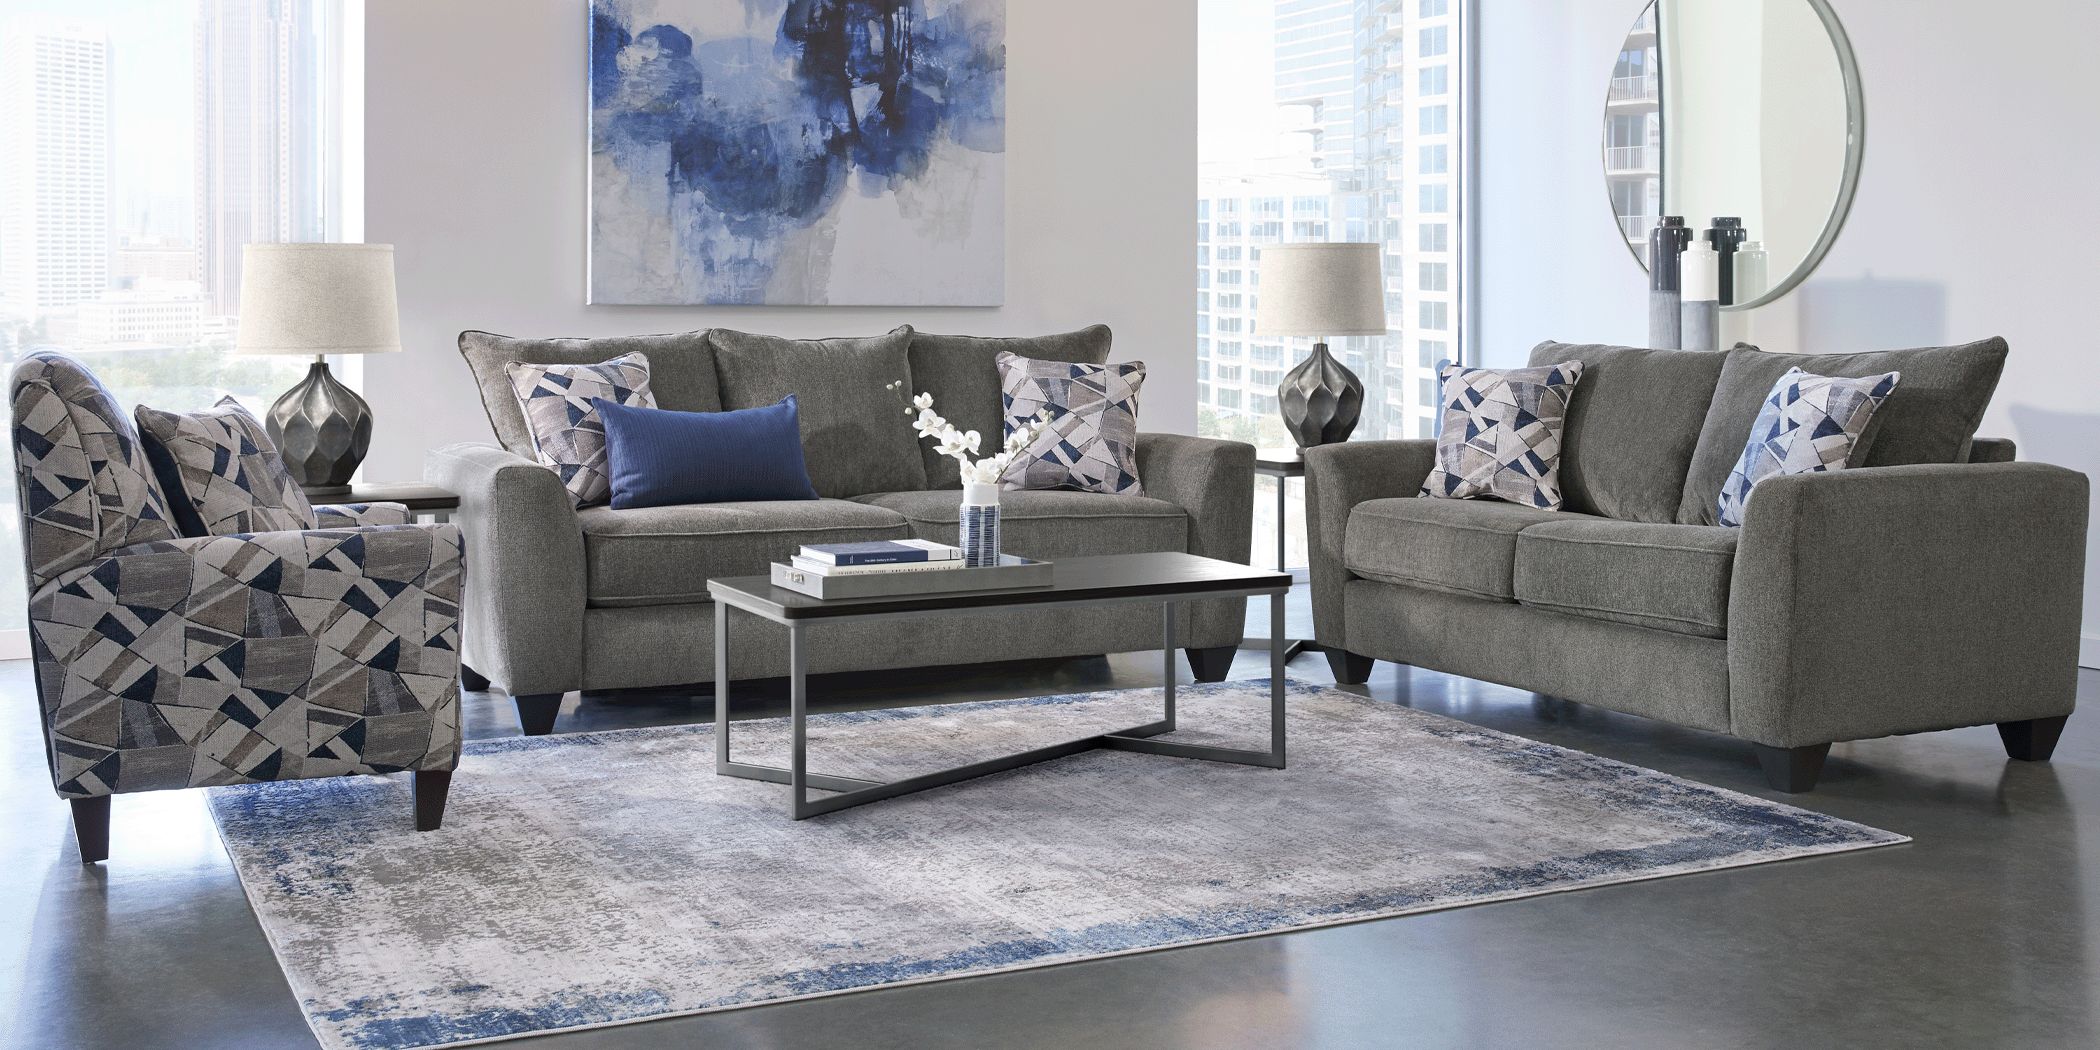 8 Piece Sectional Sofa Living Room Furniture Sets